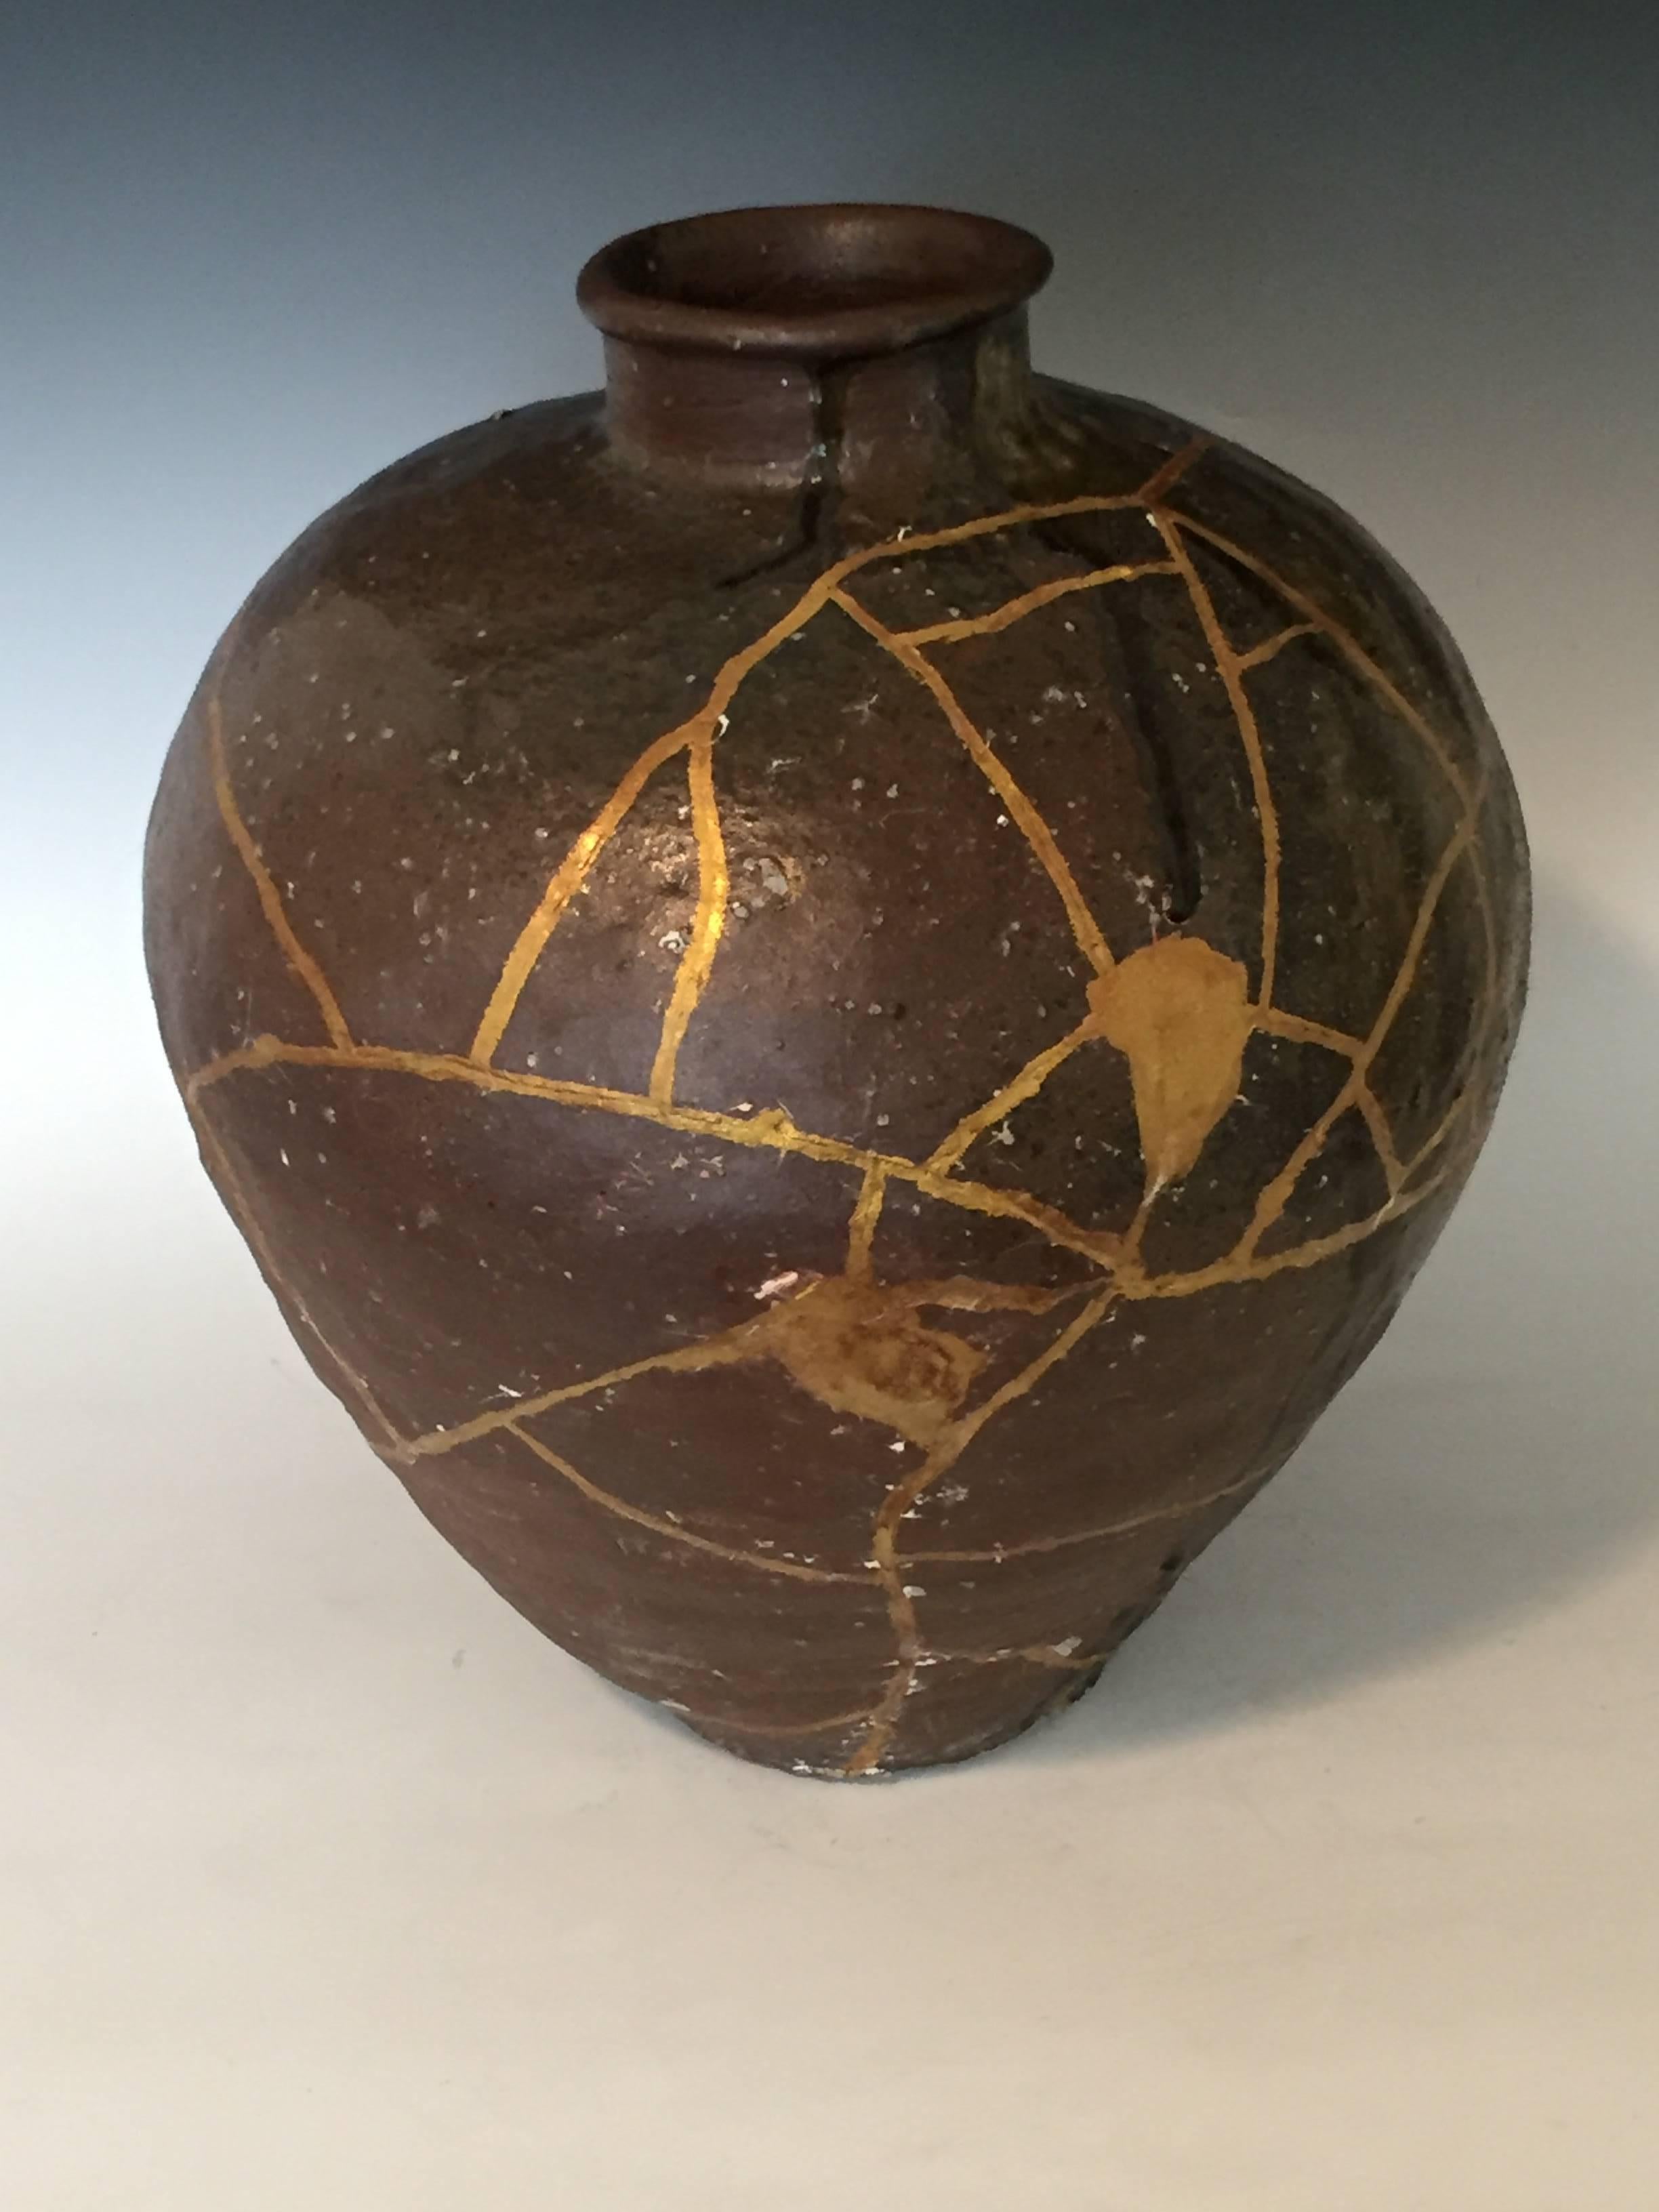 16th century Shigaraki jar with natural ash glaze. Produced during the Muromachi Period (1228-1573).
The surface is distinguished by the red, orange and green ash glazes. The core is red brick and contains many small stones. The embedded granules